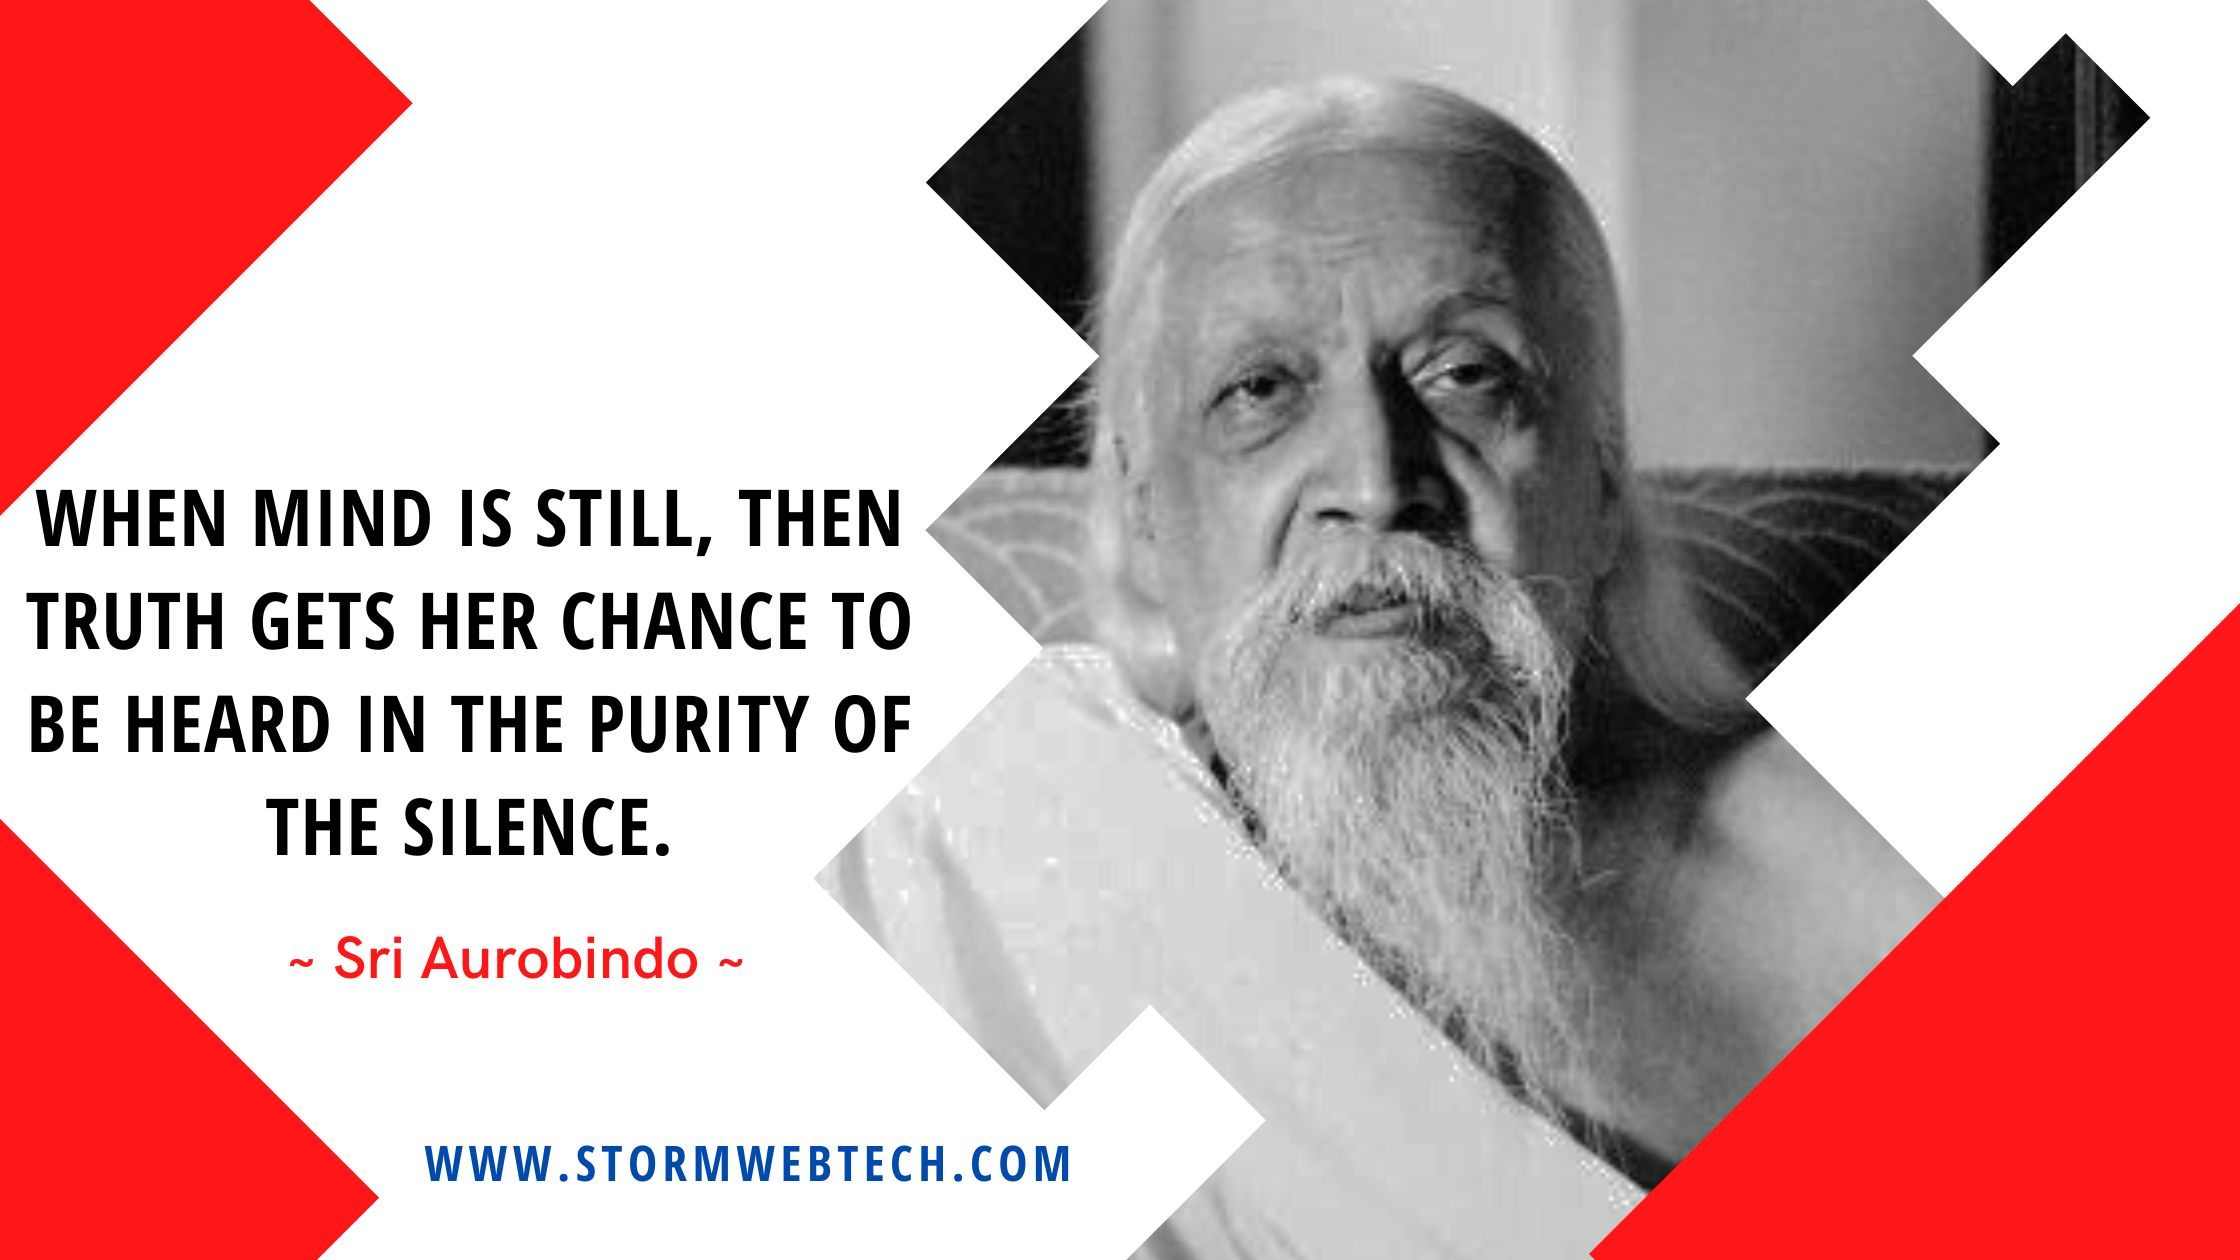 most profound and thought-provoking Sri Aurobindo quotes that shed light on various aspects of life, spirituality and the journey of self-discovery